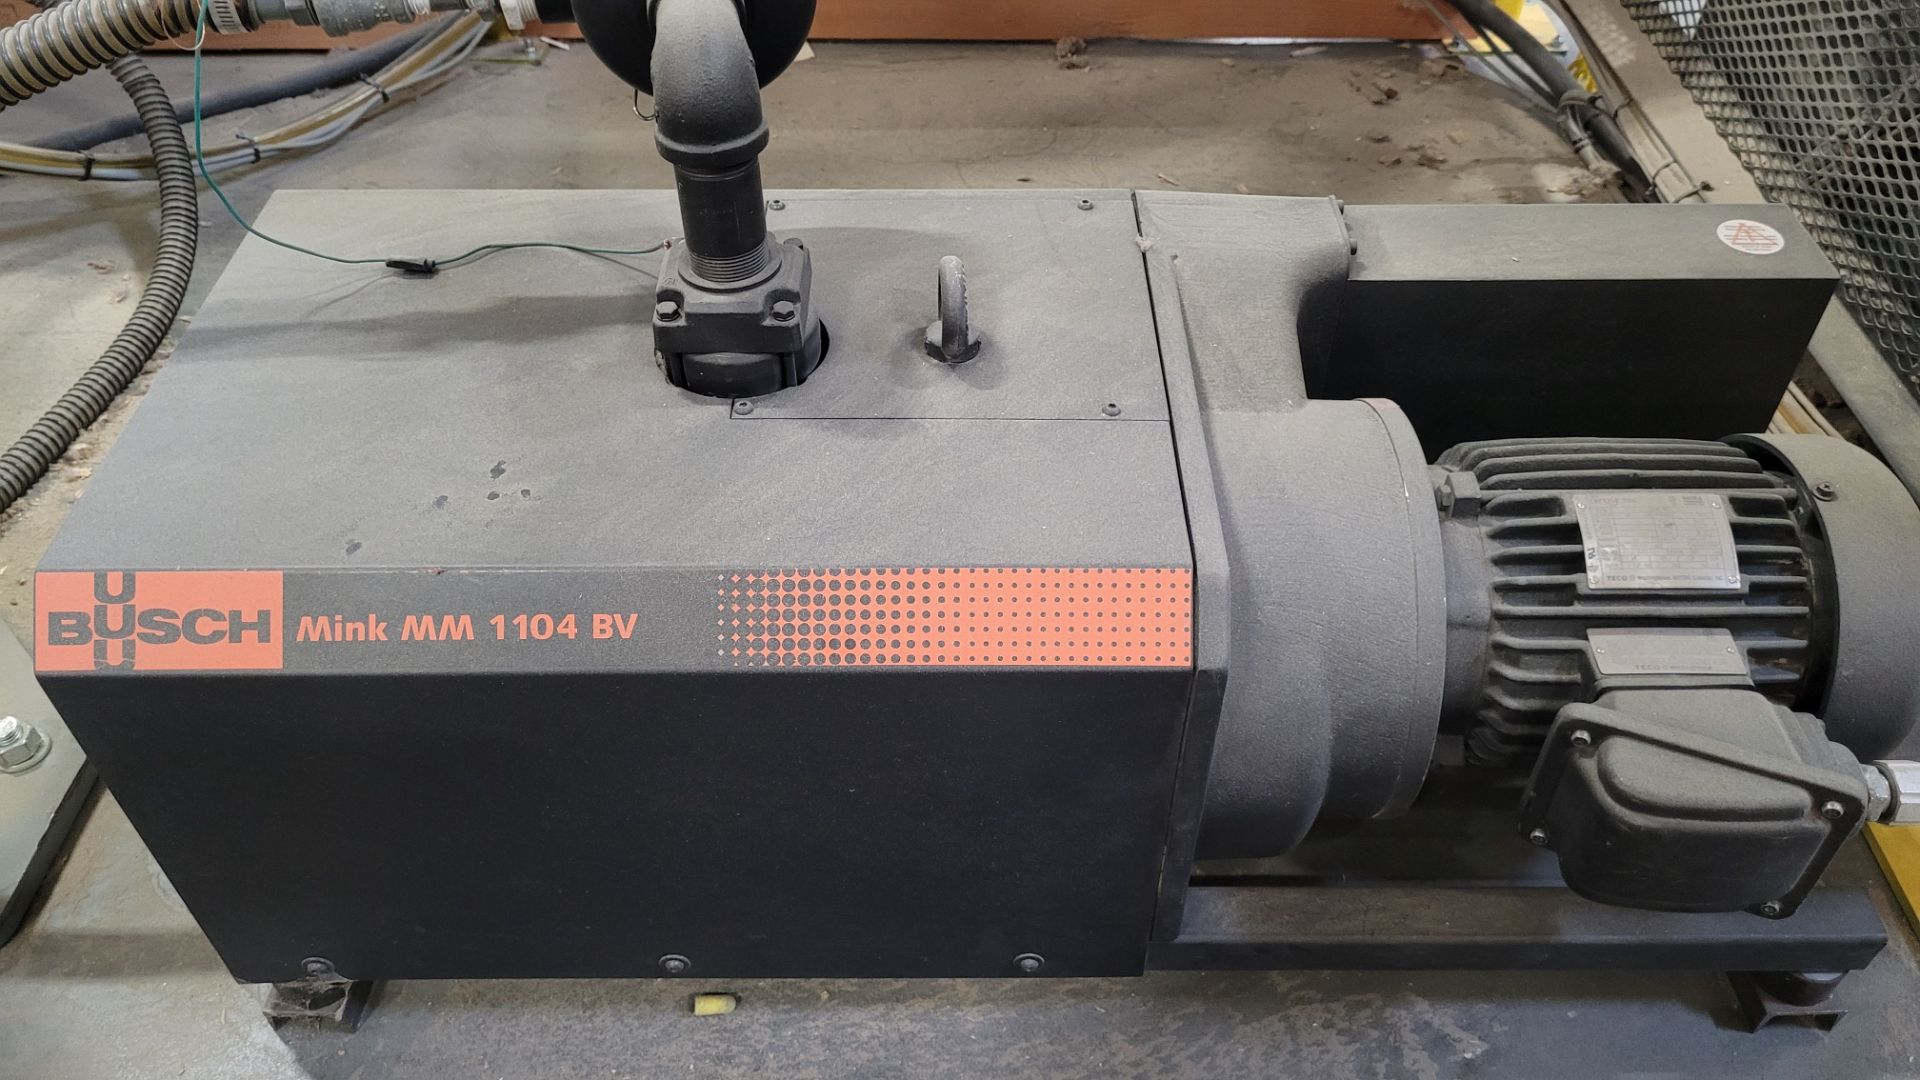 2015 KUKA KR 120 R3200 PA 5-AXIS ROBOTIC PALLETIZING / LABEL SYSTEM, 120KG LOAD CAPACITY, 3195MM MAX - Image 6 of 23